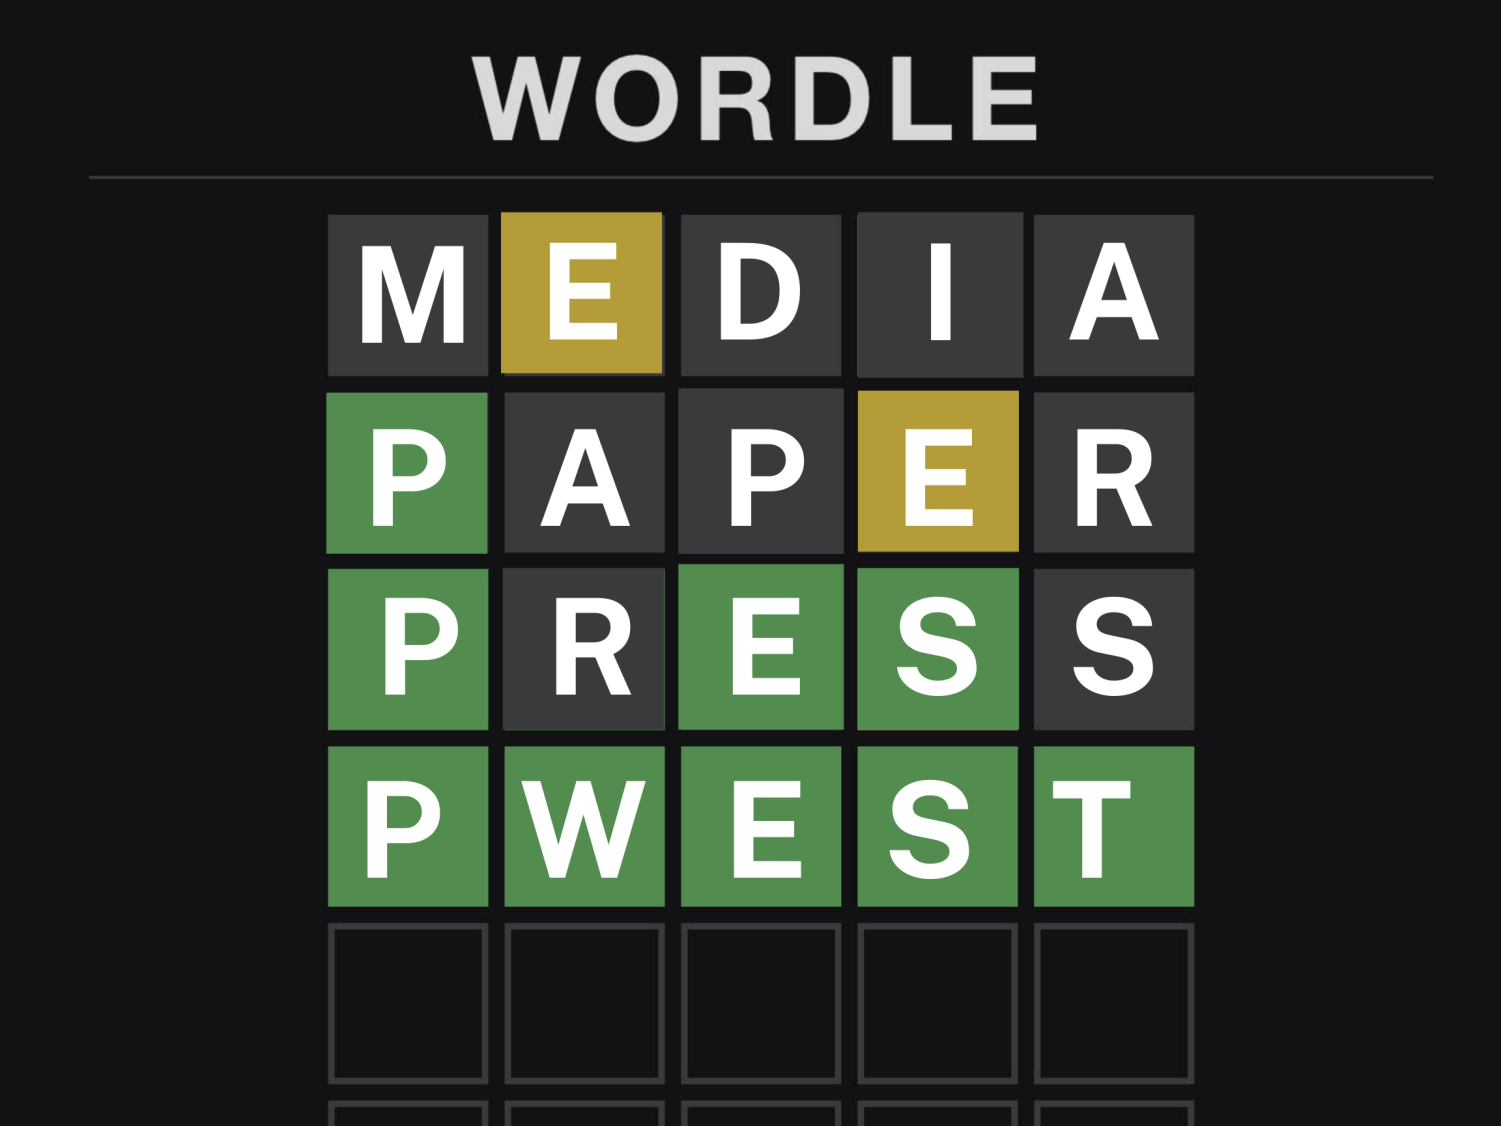 What is Wordle? The daily puzzle game Twitter is obsessed with